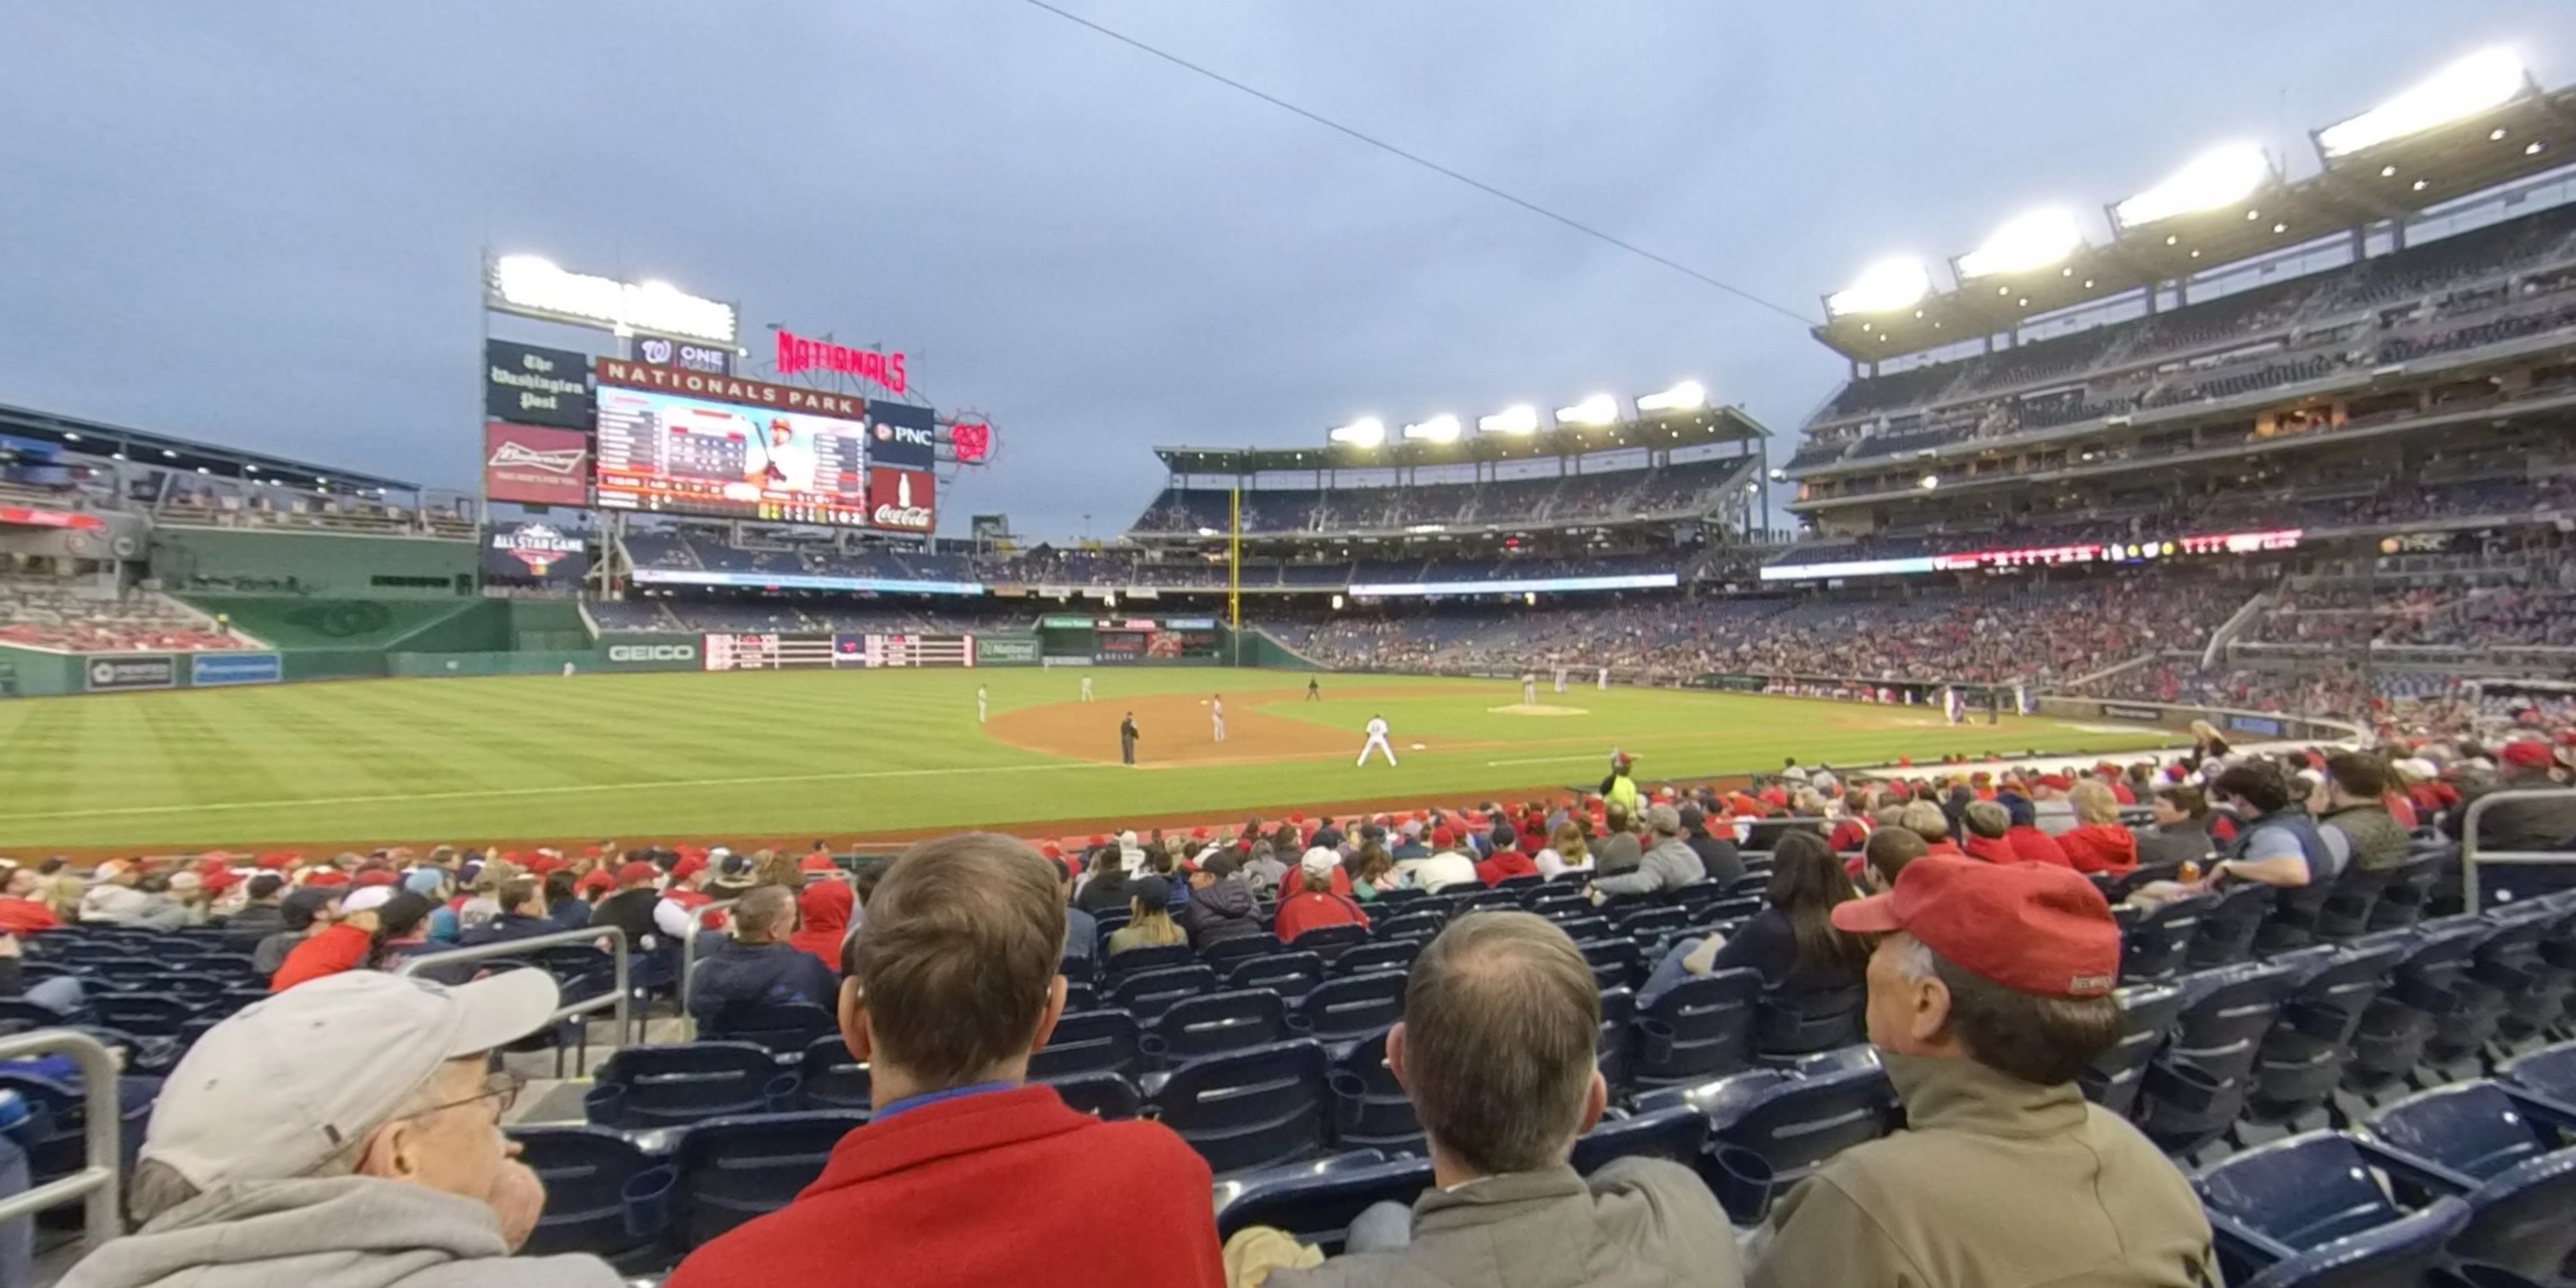 section 113 panoramic seat view  for baseball - nationals park